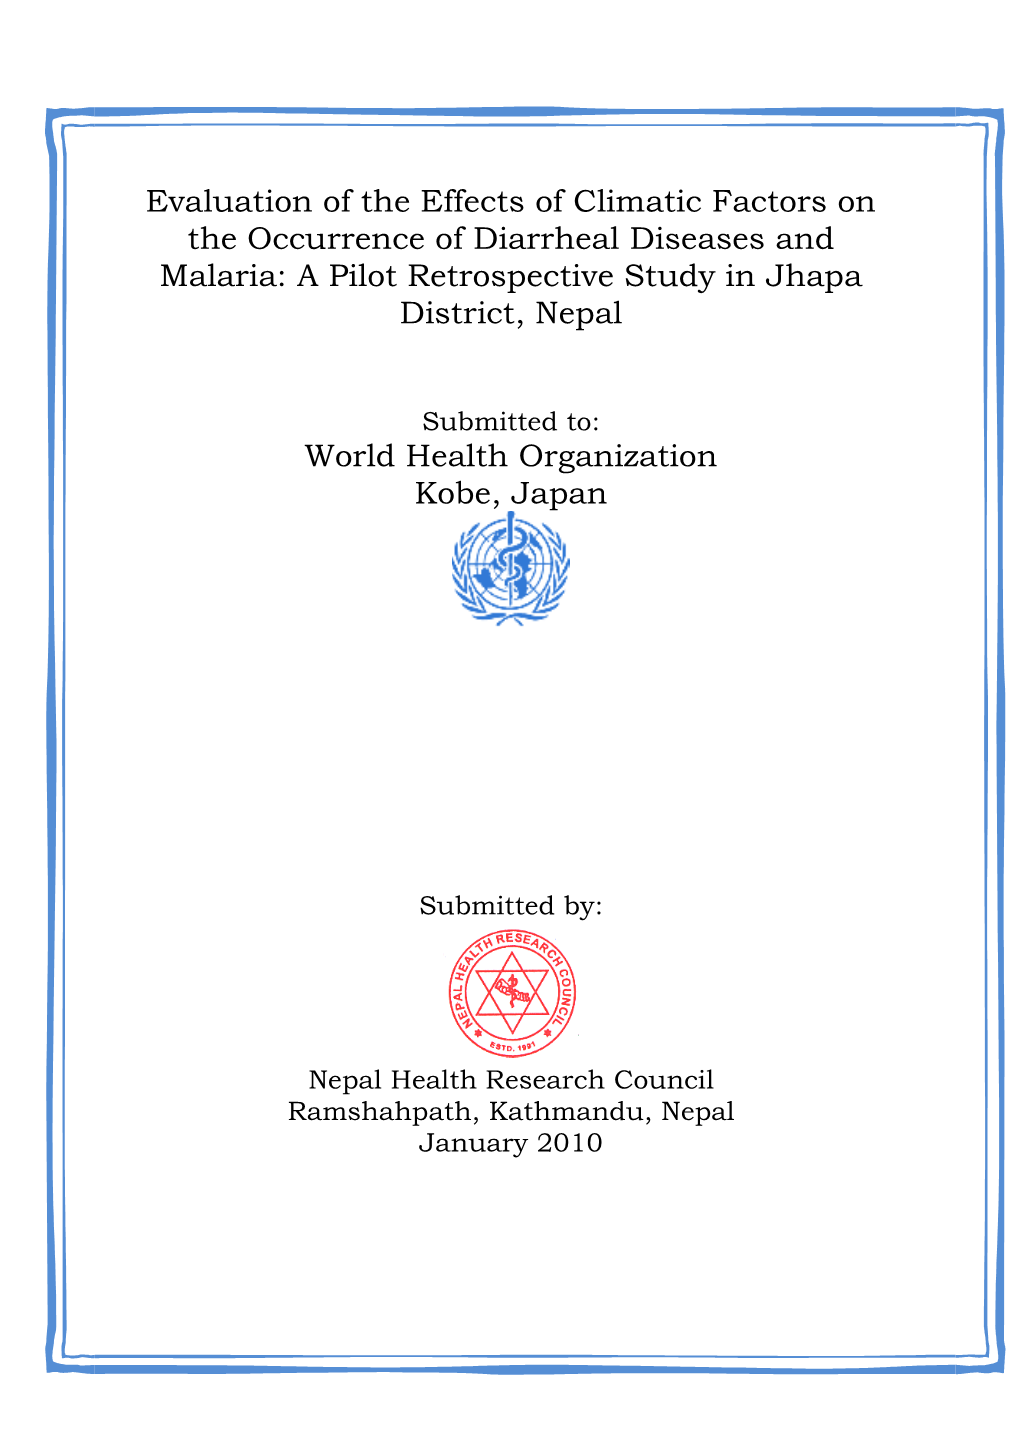 Final Report on Climate Change and Communicable Disease Submitted